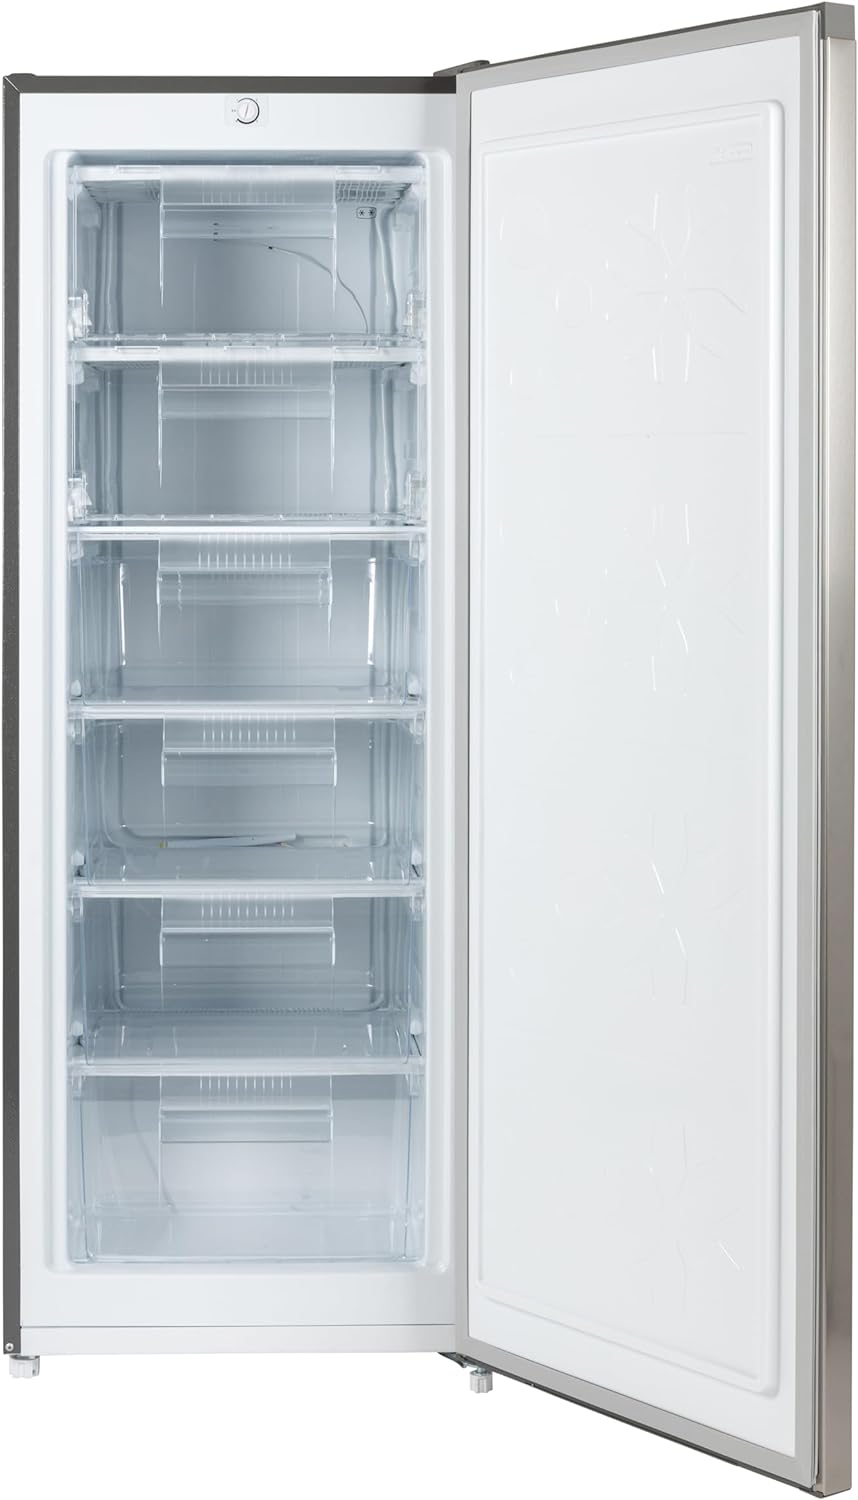 Willow WTF55X 177L Freestanding Tall Freezer with Reversible Door, Adjustable Thermostat, 2 Years Warranty - Inox - Amazing Gadgets Outlet